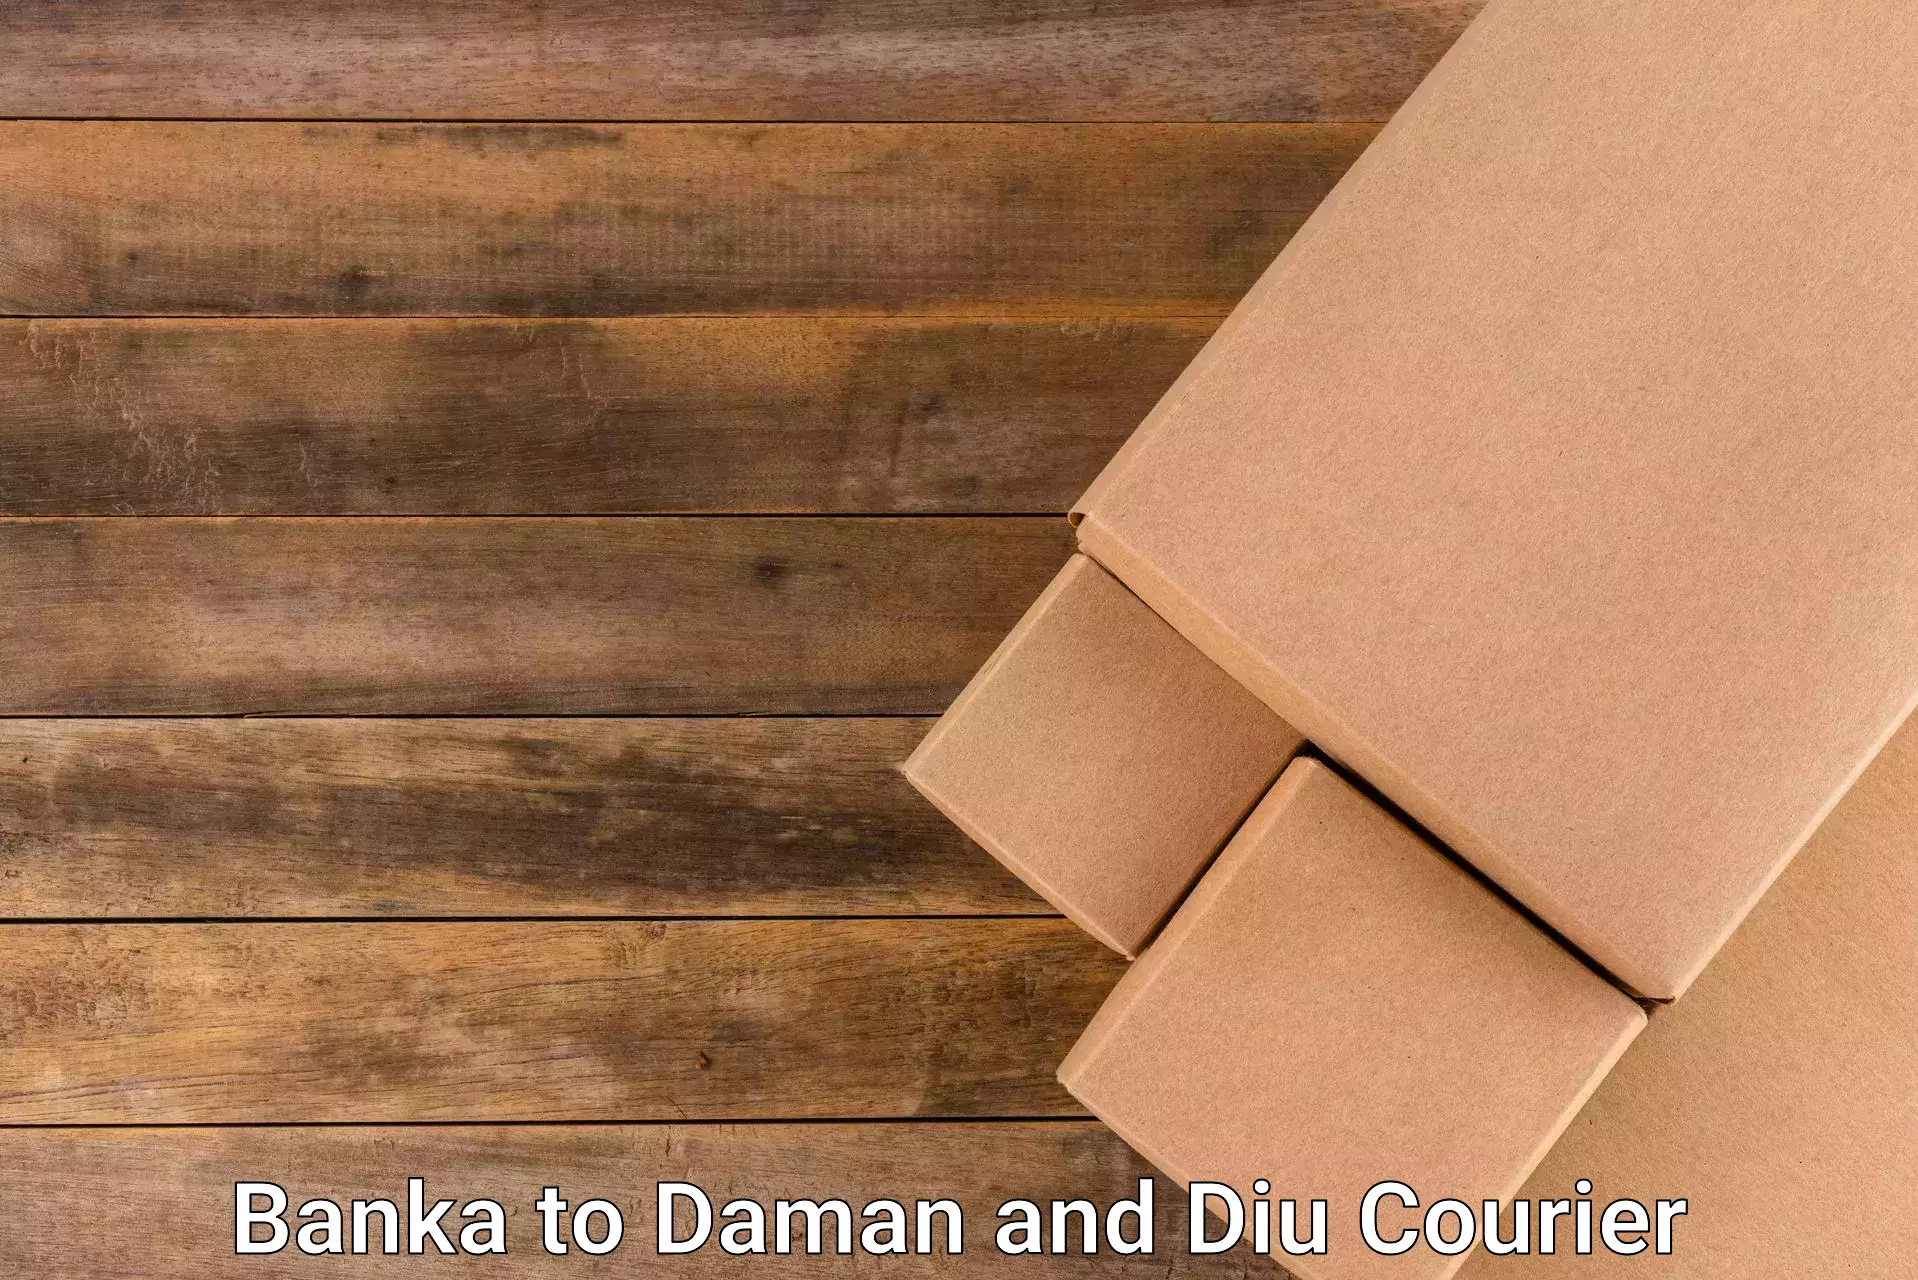 Same-day delivery solutions in Banka to Daman